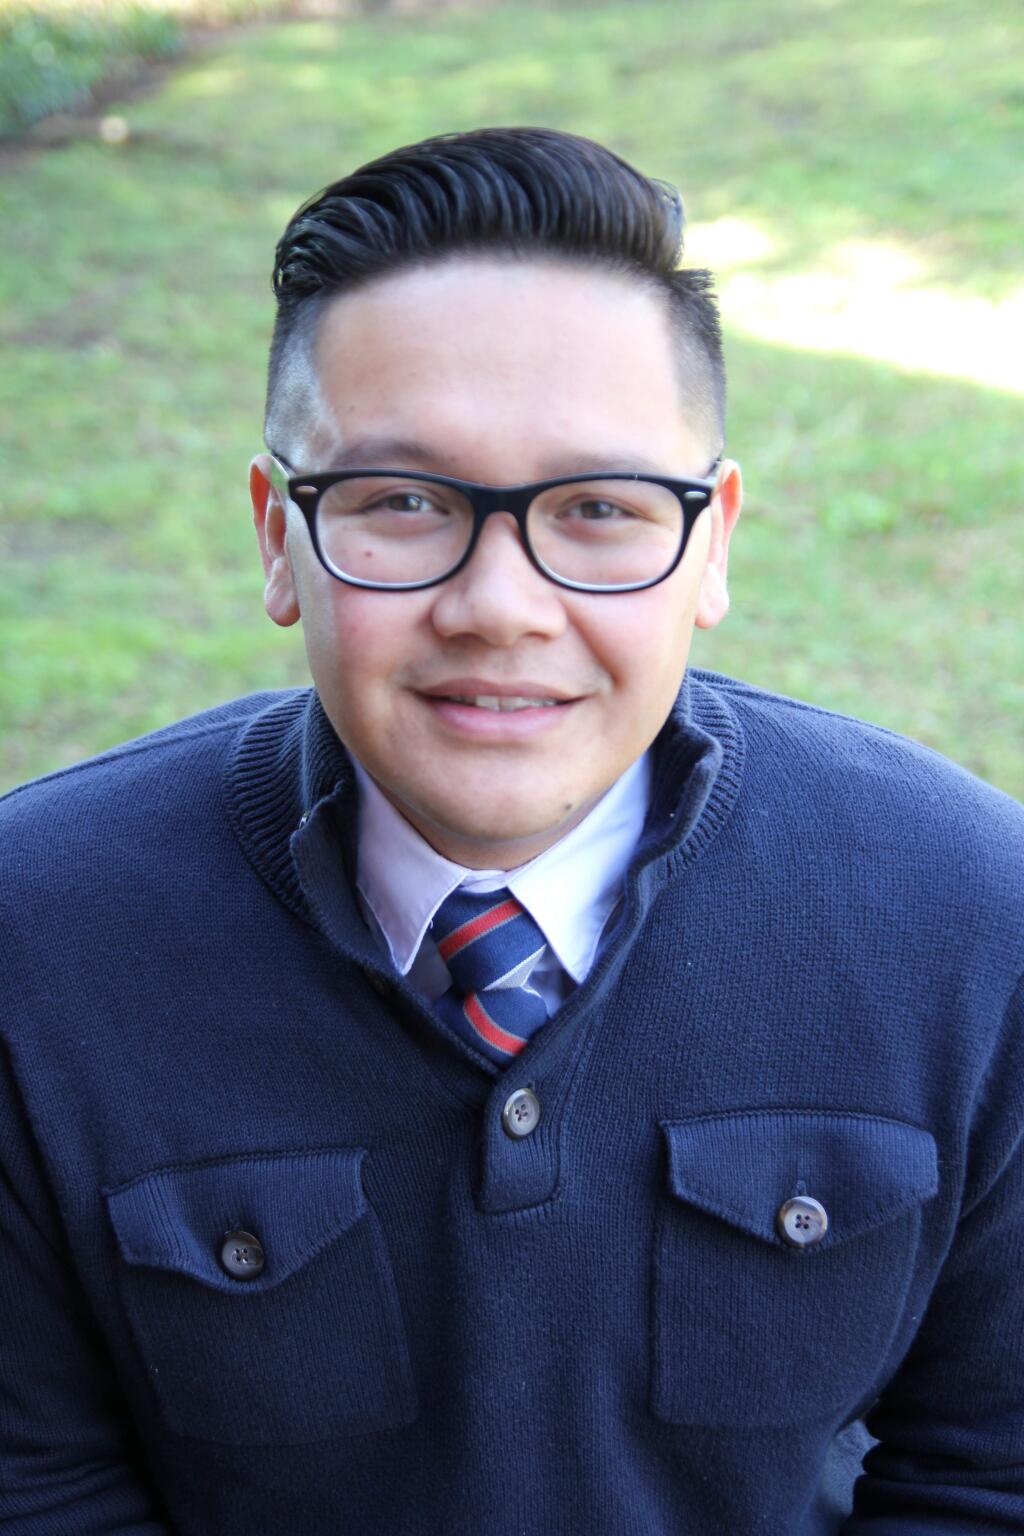 JayJay Rico, 35, director of social enterprise for Becoming Independent in Santa Rosa, is one of North Bay Business Journal's Forty Under 40 notable young professionals for 2019. (PROVIDED PHOTO)